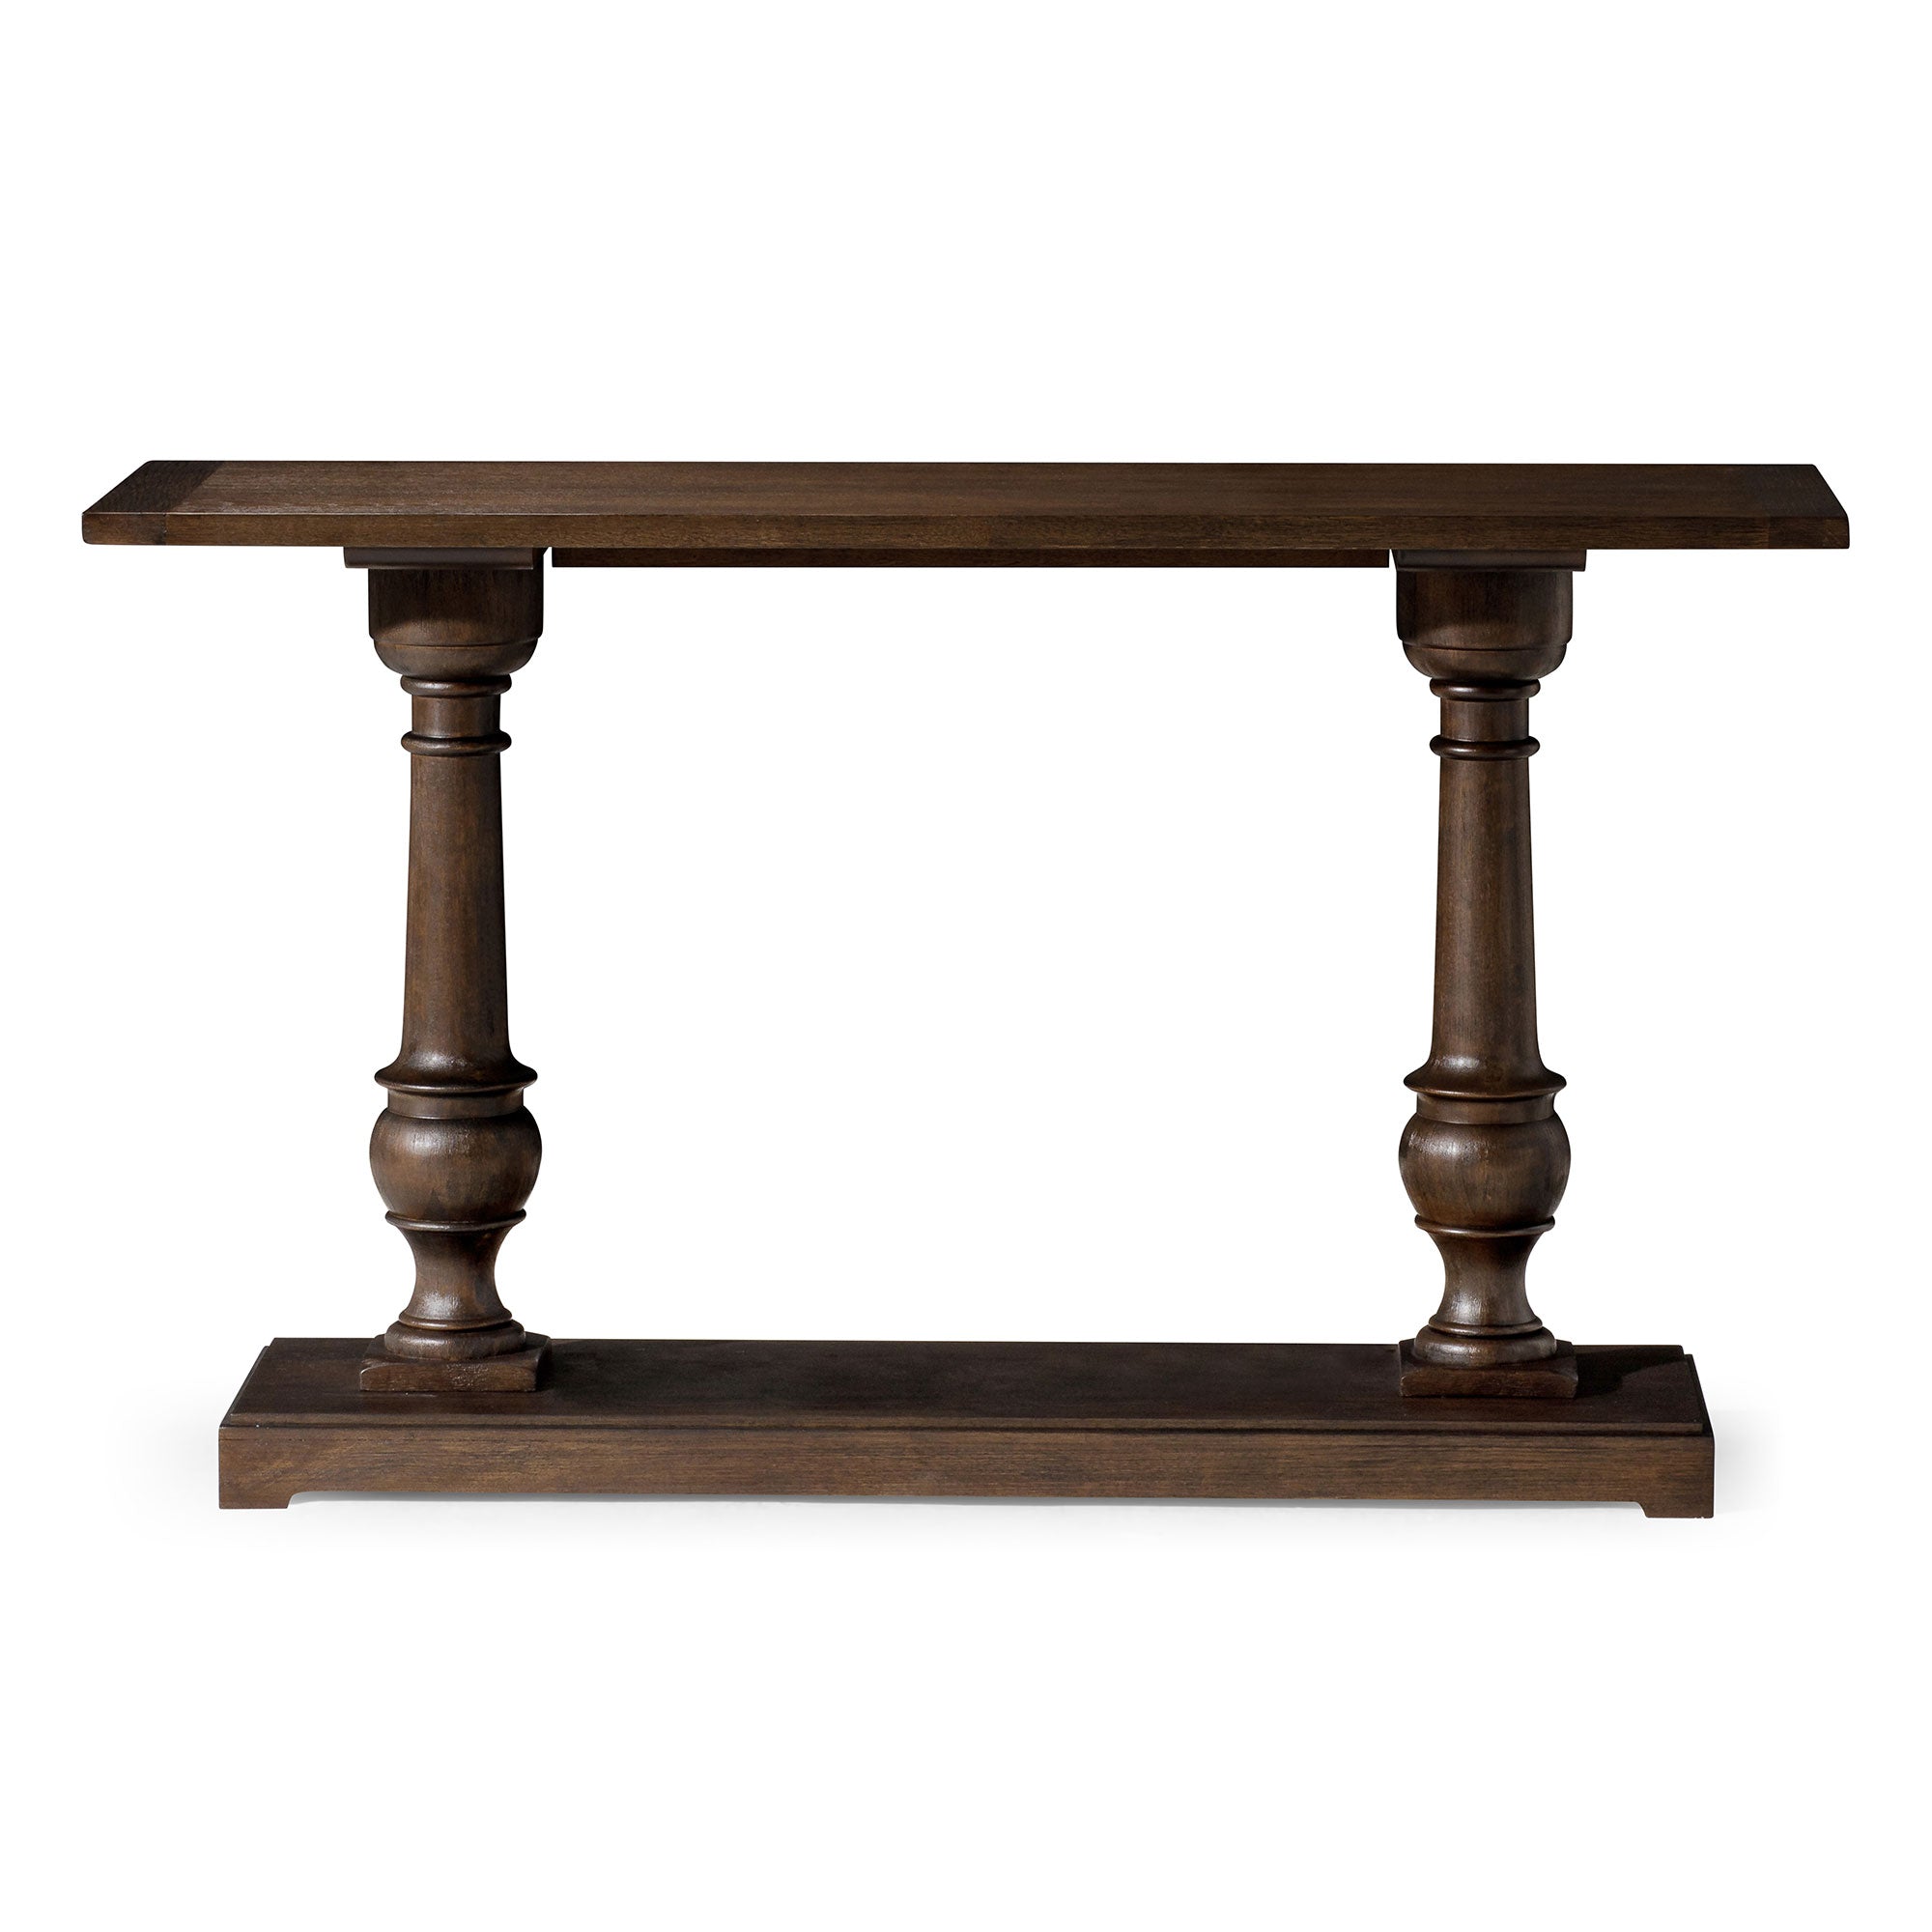 Arthur Classical Wooden Console Table in Antiqued Brown Finish in Accent Tables by Maven Lane